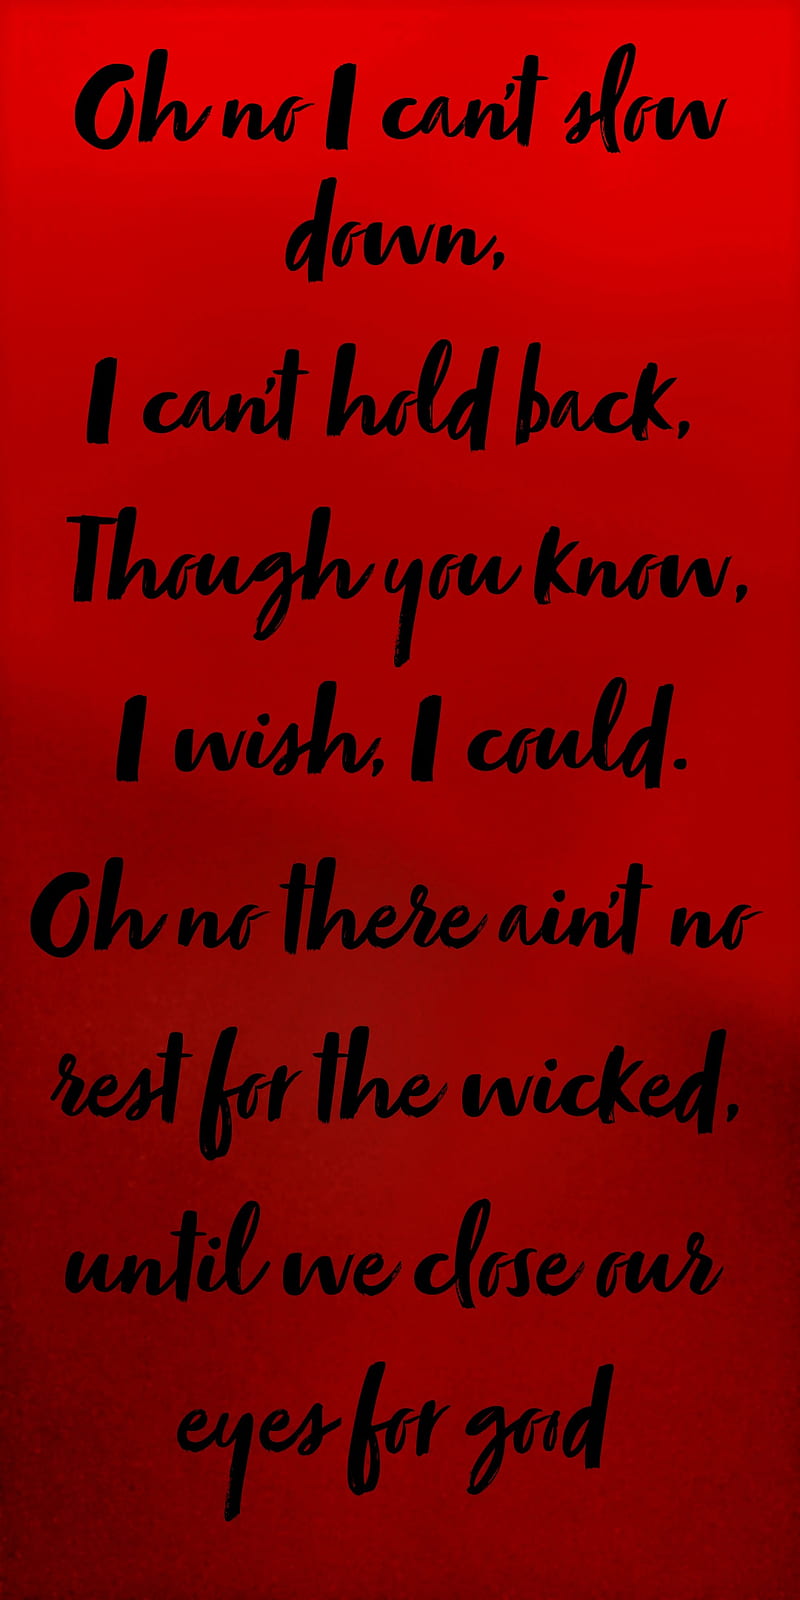 Lucifer theme, no rest for the wicked, song lyrics, HD phone wallpaper